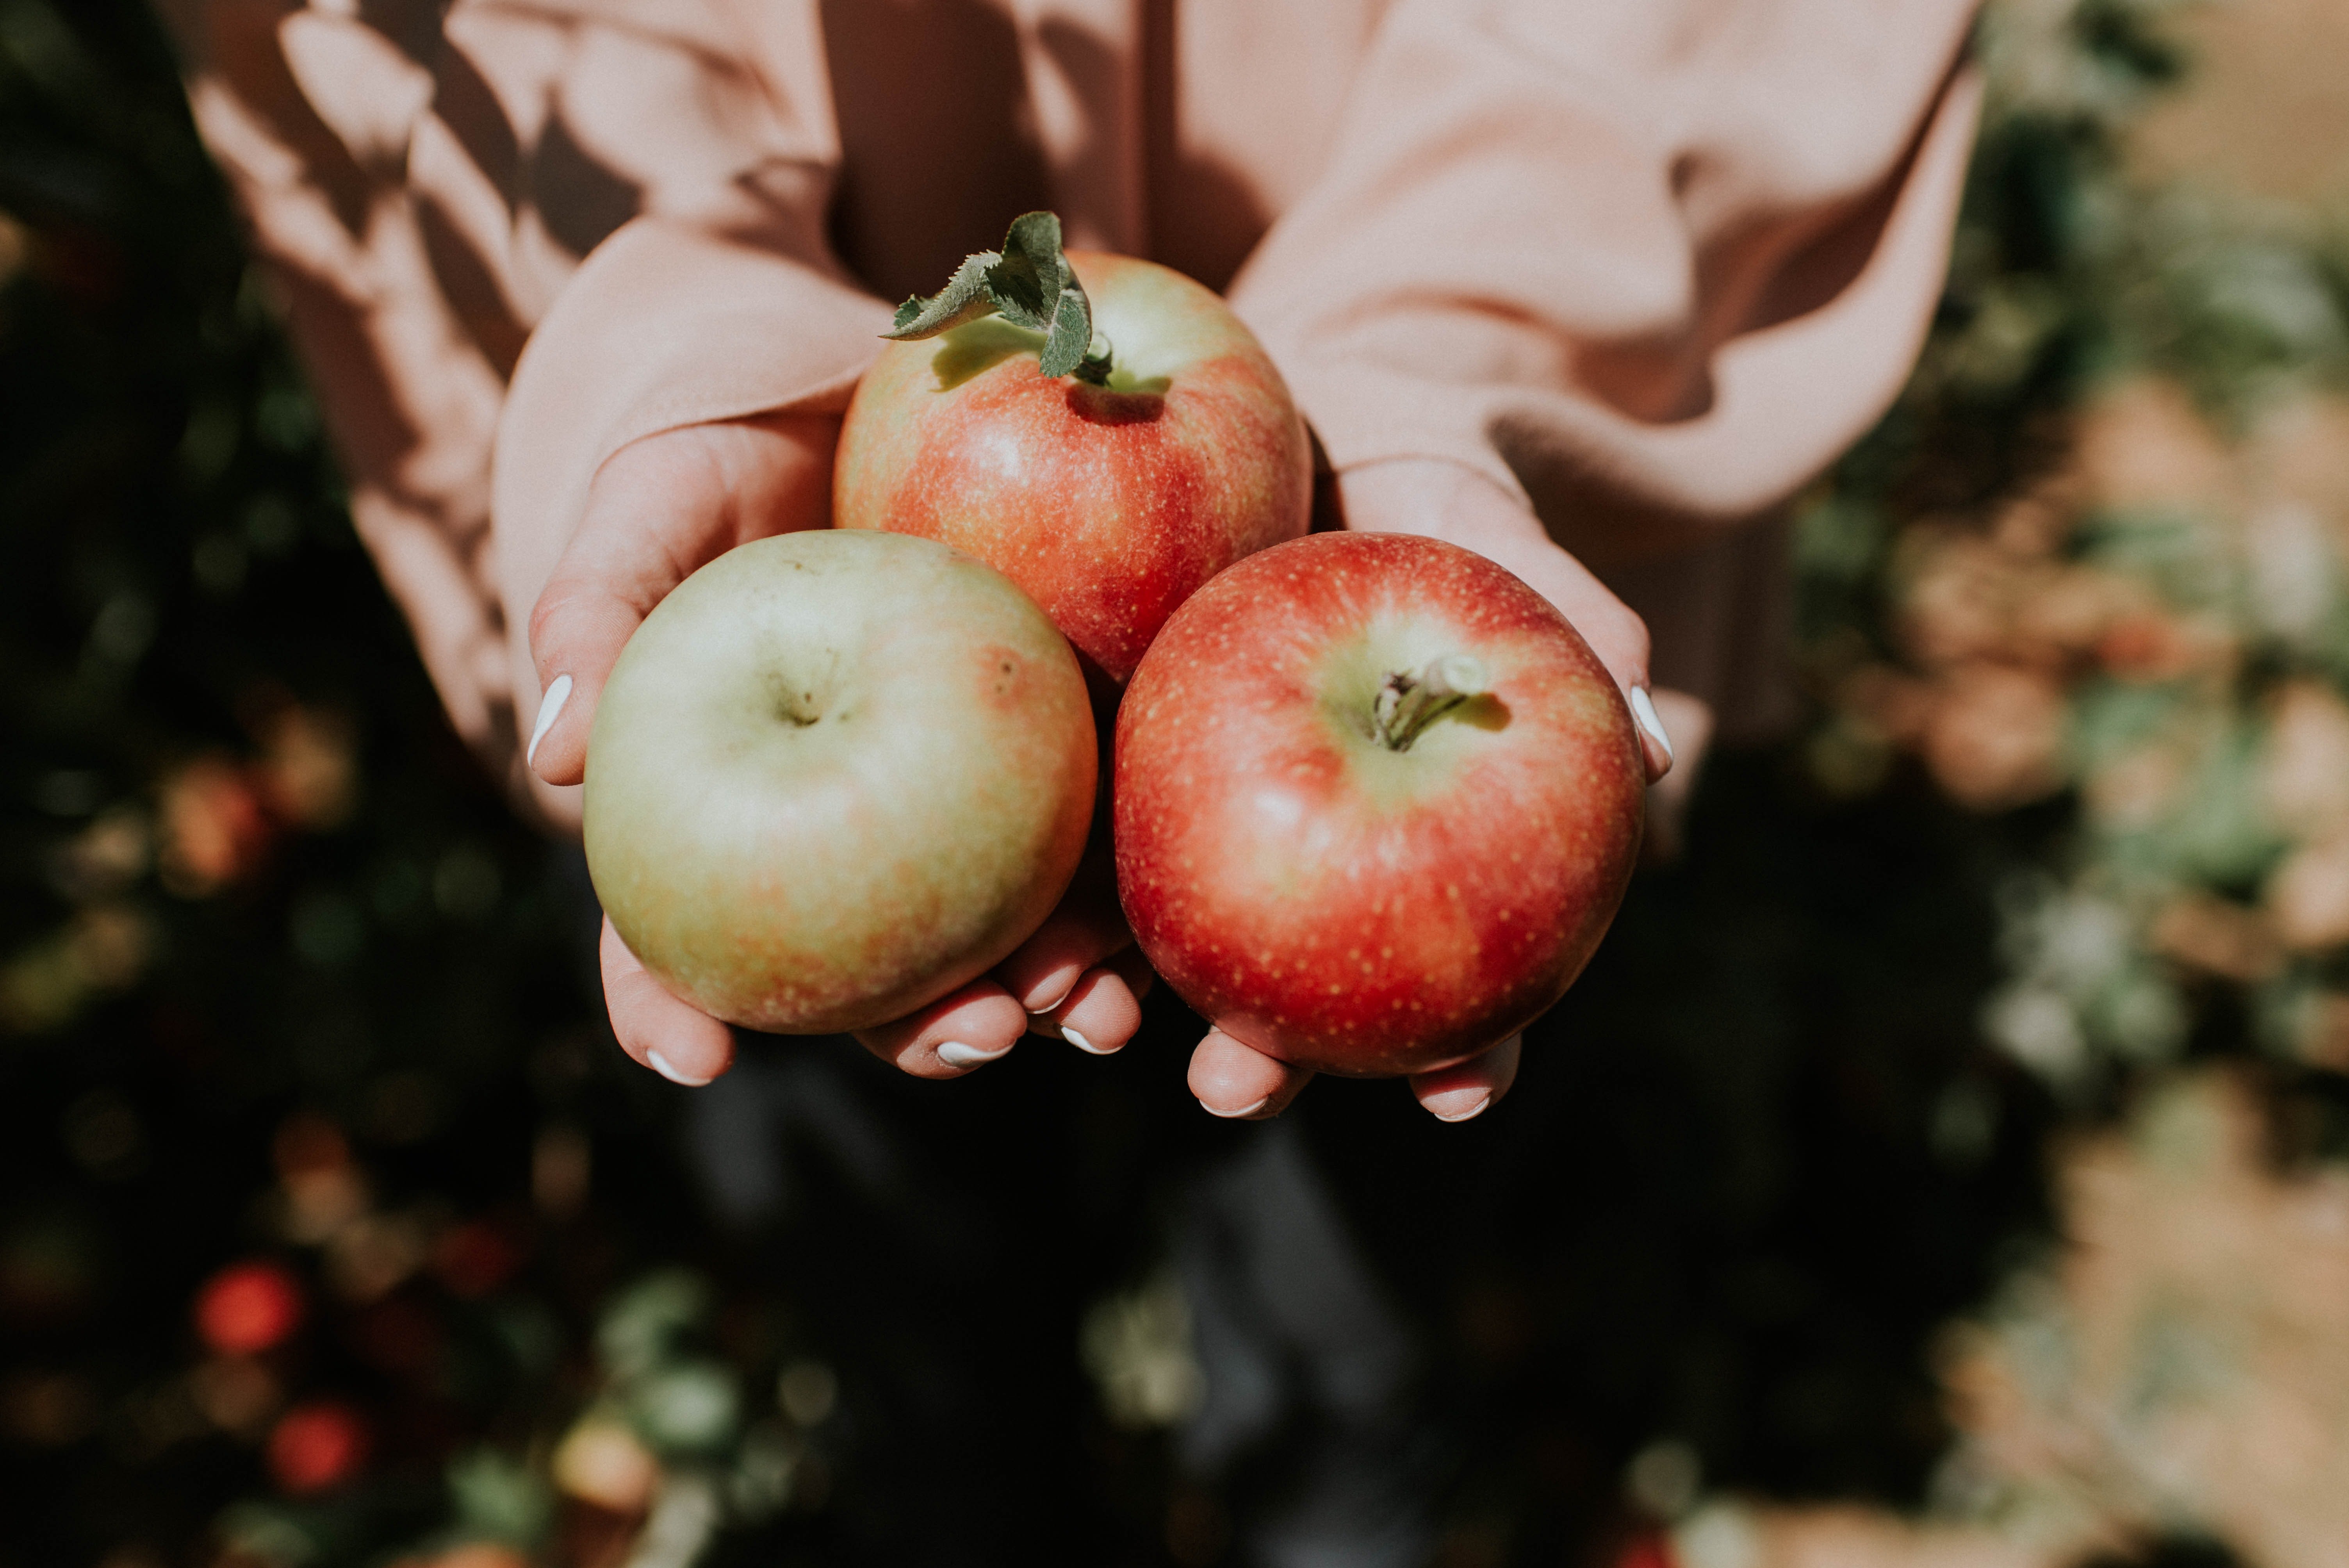 Gina was picking apples when she smelled the smoke. | Source: Unsplash